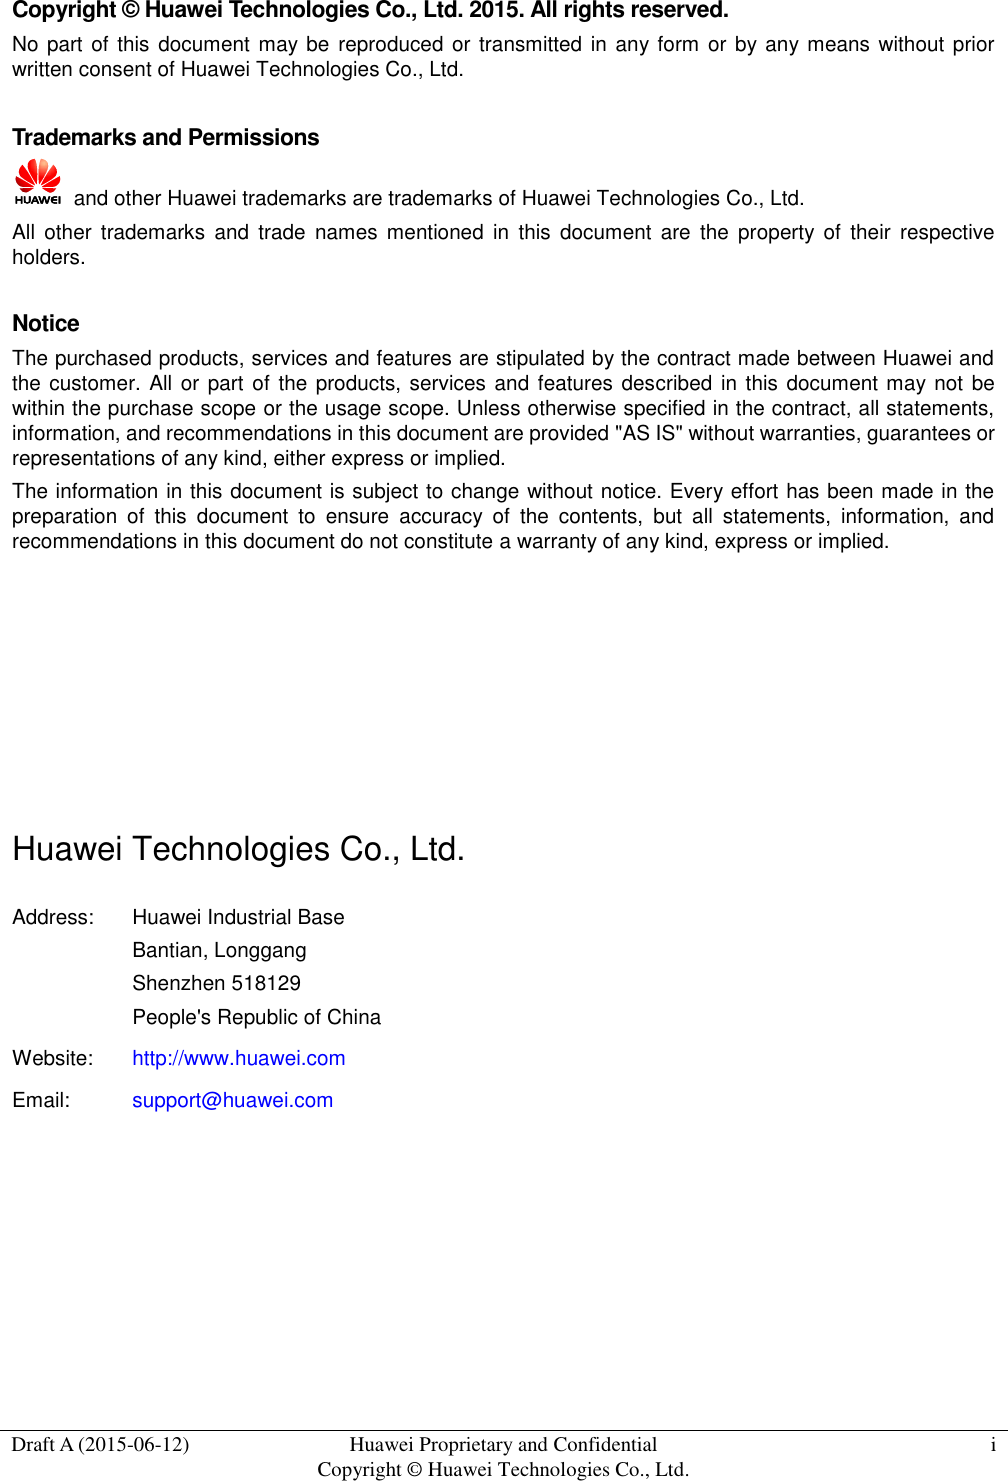  Draft A (2015-06-12) Huawei Proprietary and Confidential           Copyright © Huawei Technologies Co., Ltd. i  Copyright © Huawei Technologies Co., Ltd. 2015. All rights reserved. No part of this  document  may be  reproduced or transmitted in any form or by any means without  prior written consent of Huawei Technologies Co., Ltd.  Trademarks and Permissions   and other Huawei trademarks are trademarks of Huawei Technologies Co., Ltd. All  other  trademarks  and  trade  names  mentioned in  this  document  are  the  property  of  their  respective holders.  Notice The purchased products, services and features are stipulated by the contract made between Huawei and the customer.  All or part of the products, services and features described in this document may not be within the purchase scope or the usage scope. Unless otherwise specified in the contract, all statements, information, and recommendations in this document are provided &quot;AS IS&quot; without warranties, guarantees or representations of any kind, either express or implied. The information in this document is subject to change without notice. Every effort has been made in the preparation  of  this  document  to  ensure  accuracy  of  the  contents,  but  all  statements,  information,  and recommendations in this document do not constitute a warranty of any kind, express or implied.       Huawei Technologies Co., Ltd. Address: Huawei Industrial Base Bantian, Longgang Shenzhen 518129 People&apos;s Republic of China Website: http://www.huawei.com Email: support@huawei.com   